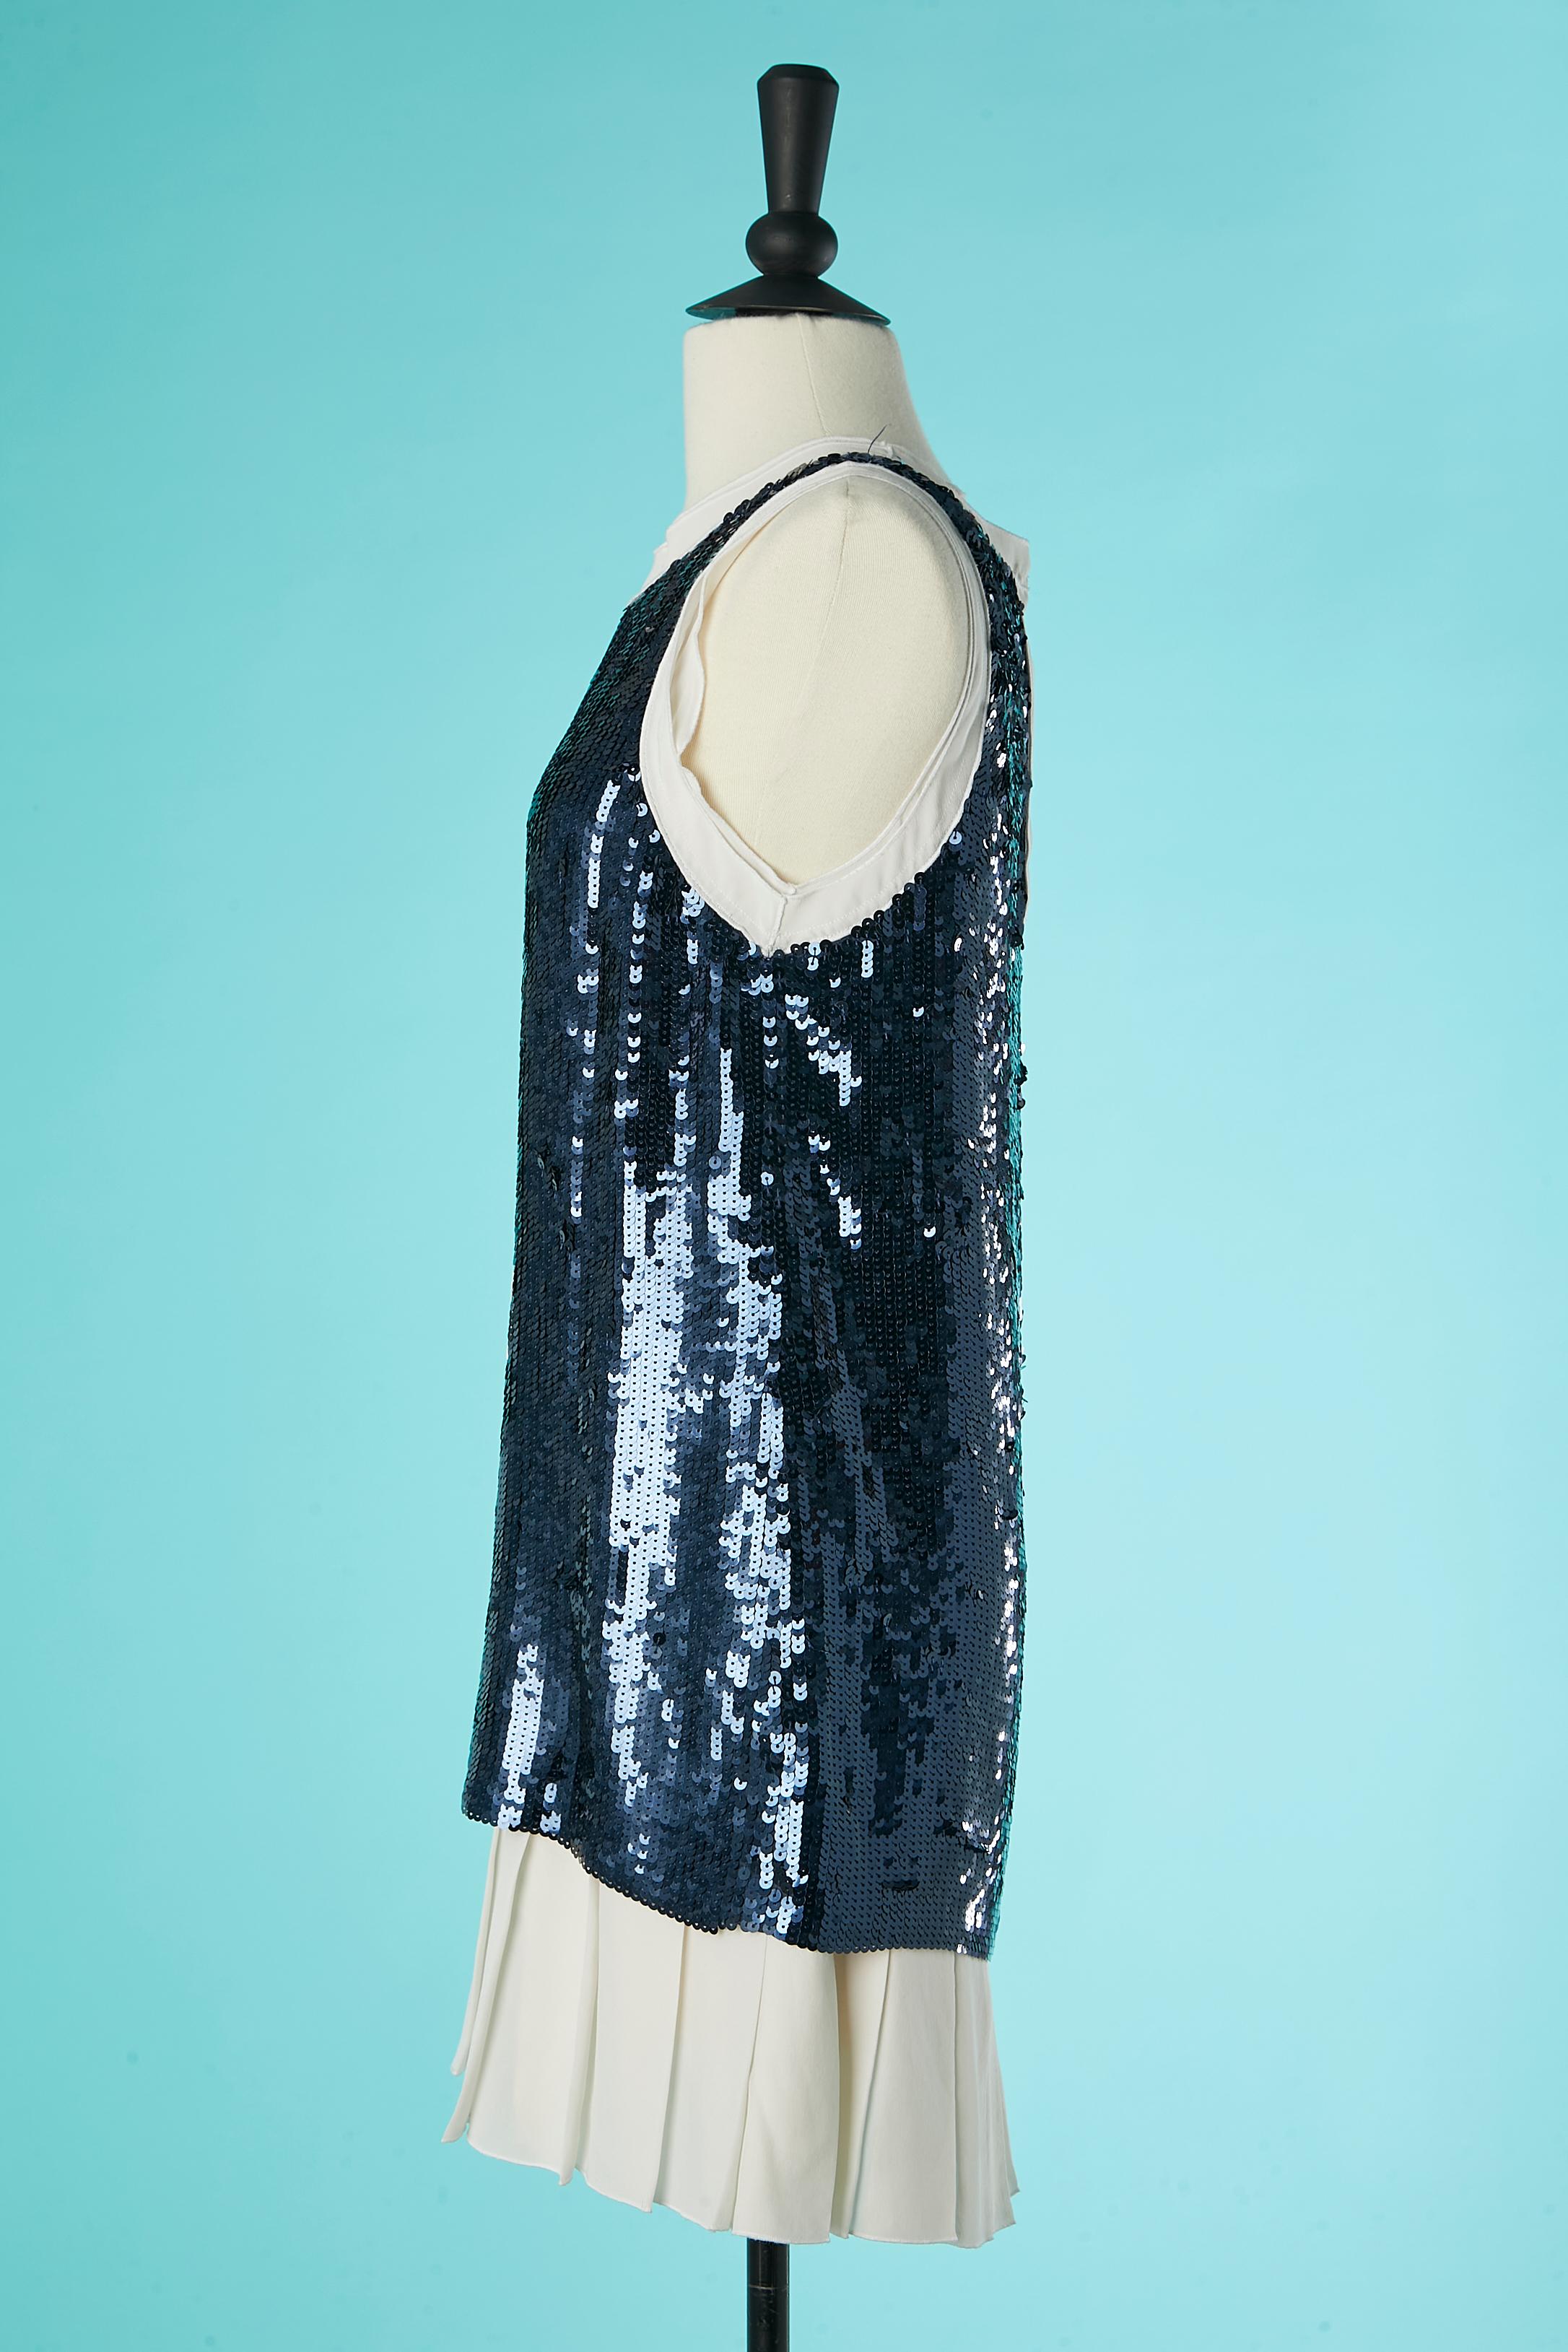 Mini dress in blue sequin with Anchor pattern and pleated bottom edge D&G  For Sale 1